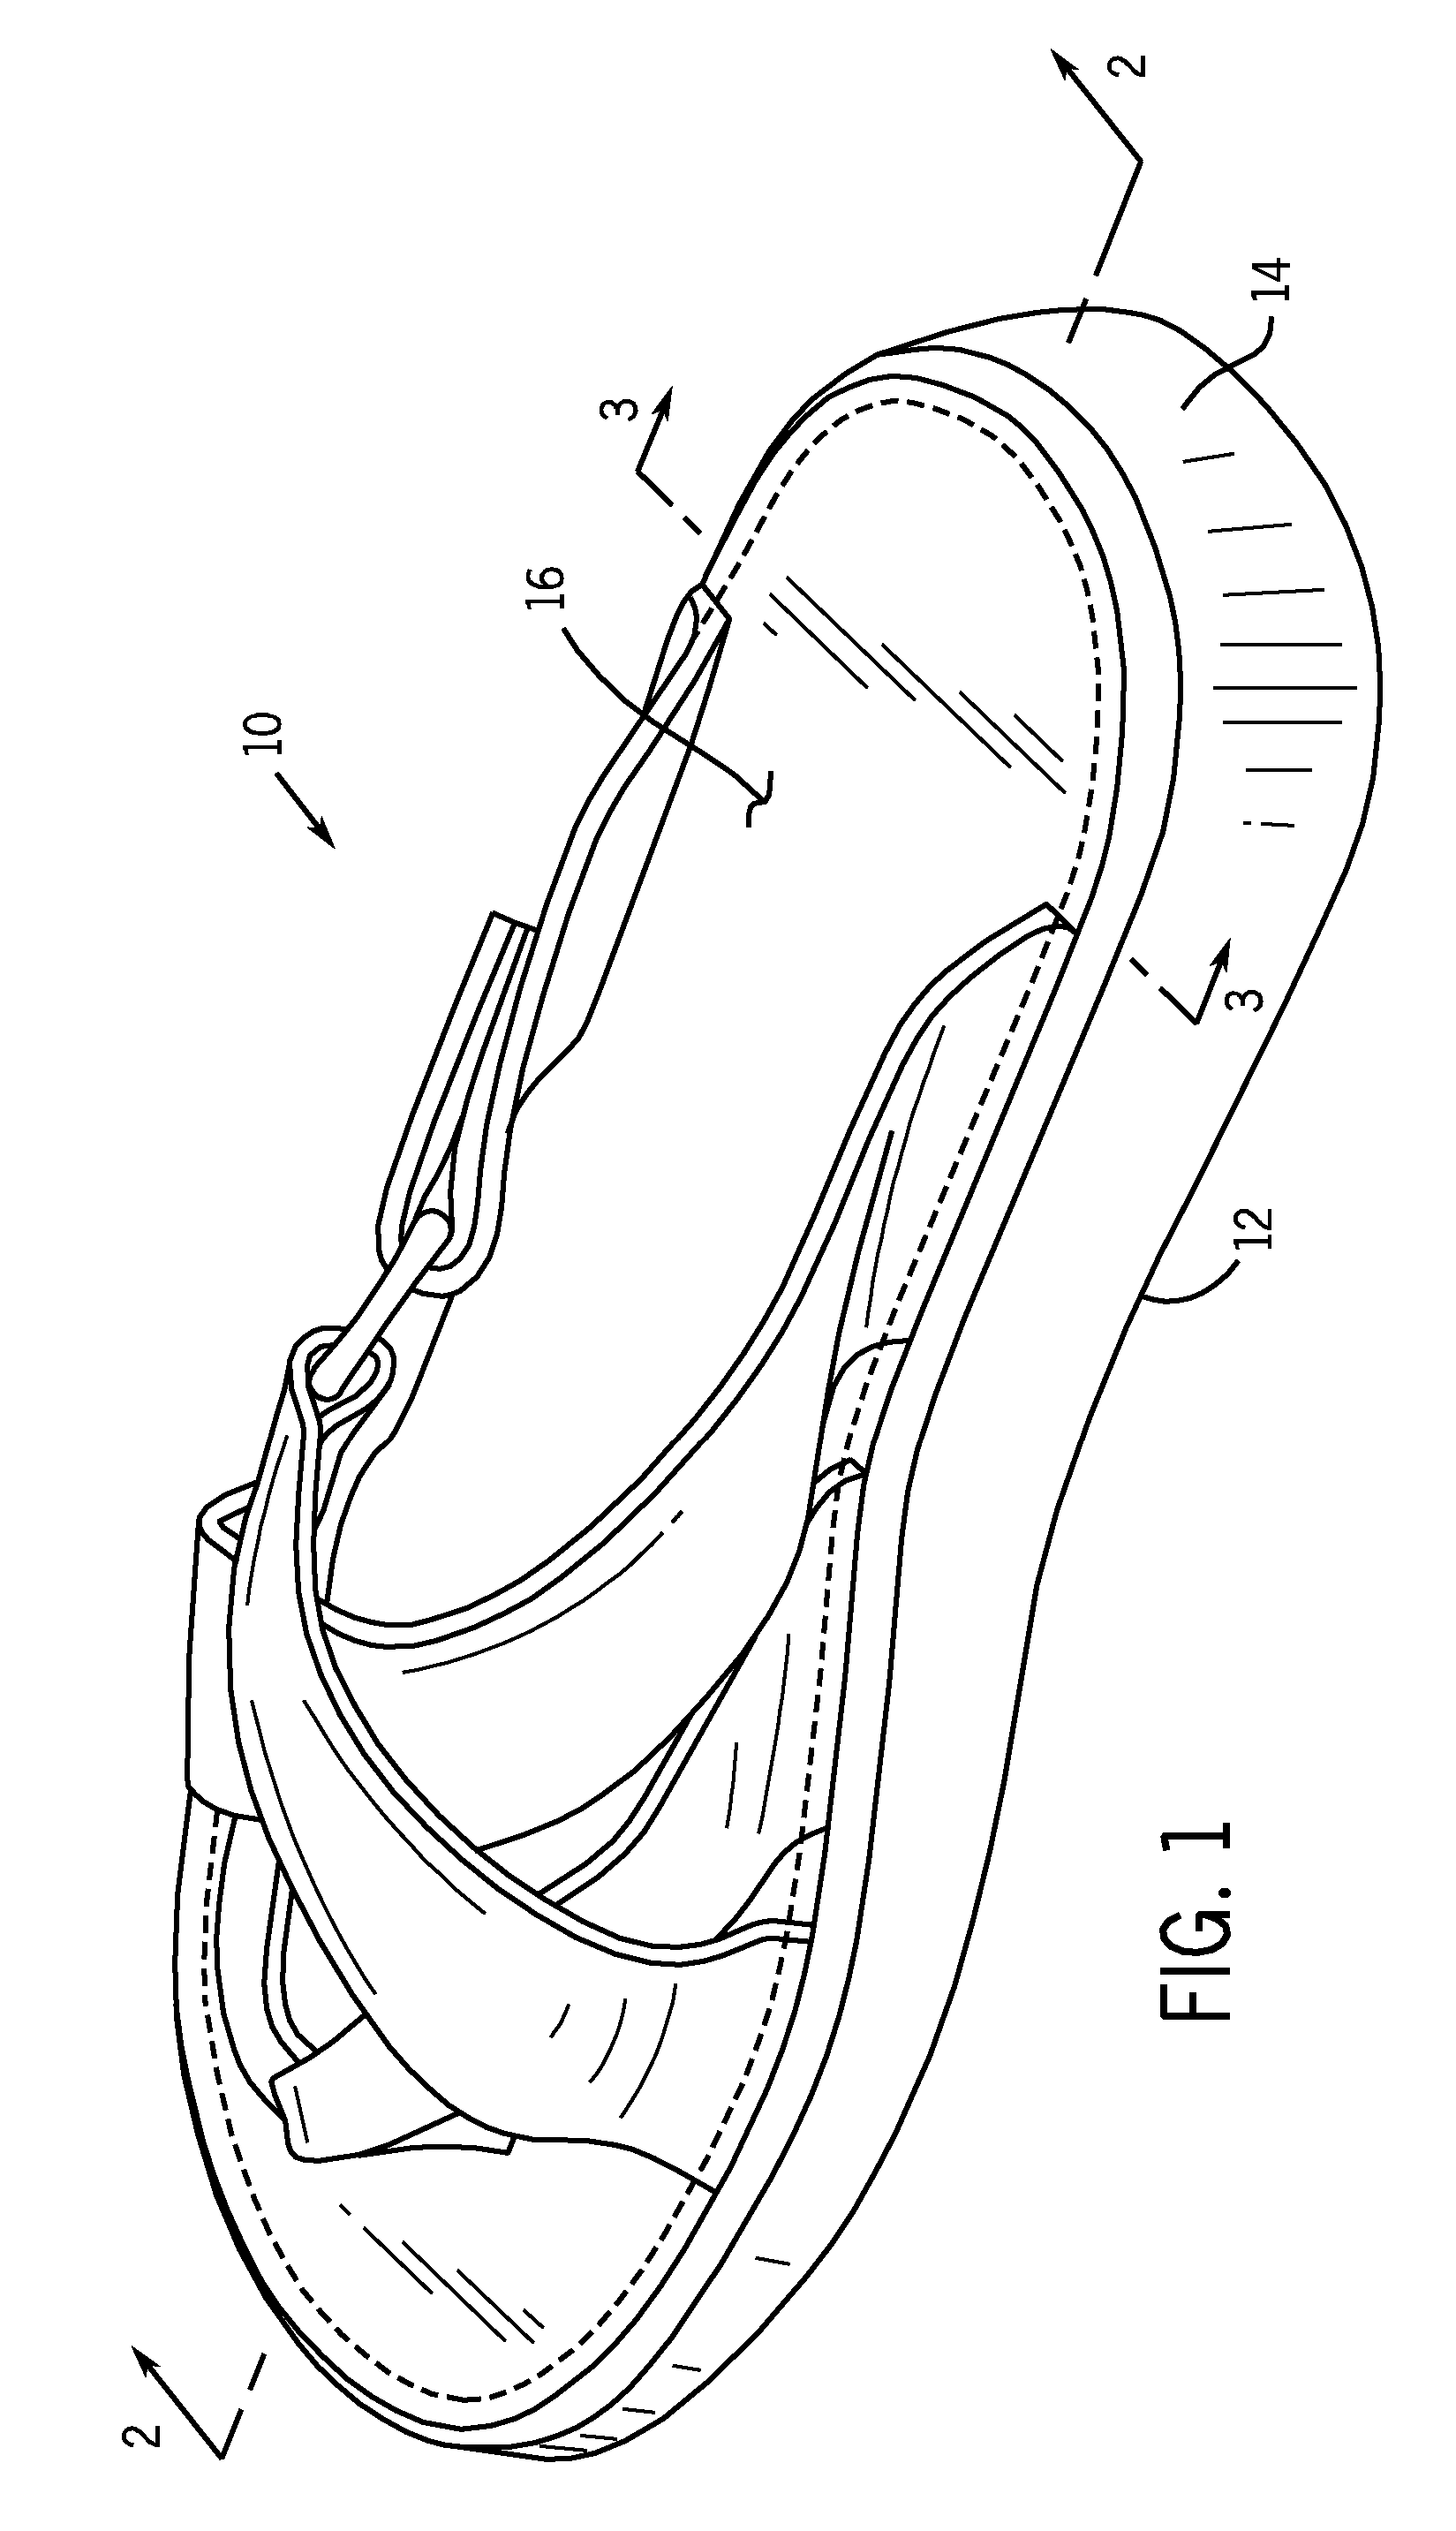 Shoe sole with loose fill compartments seperated by arch support